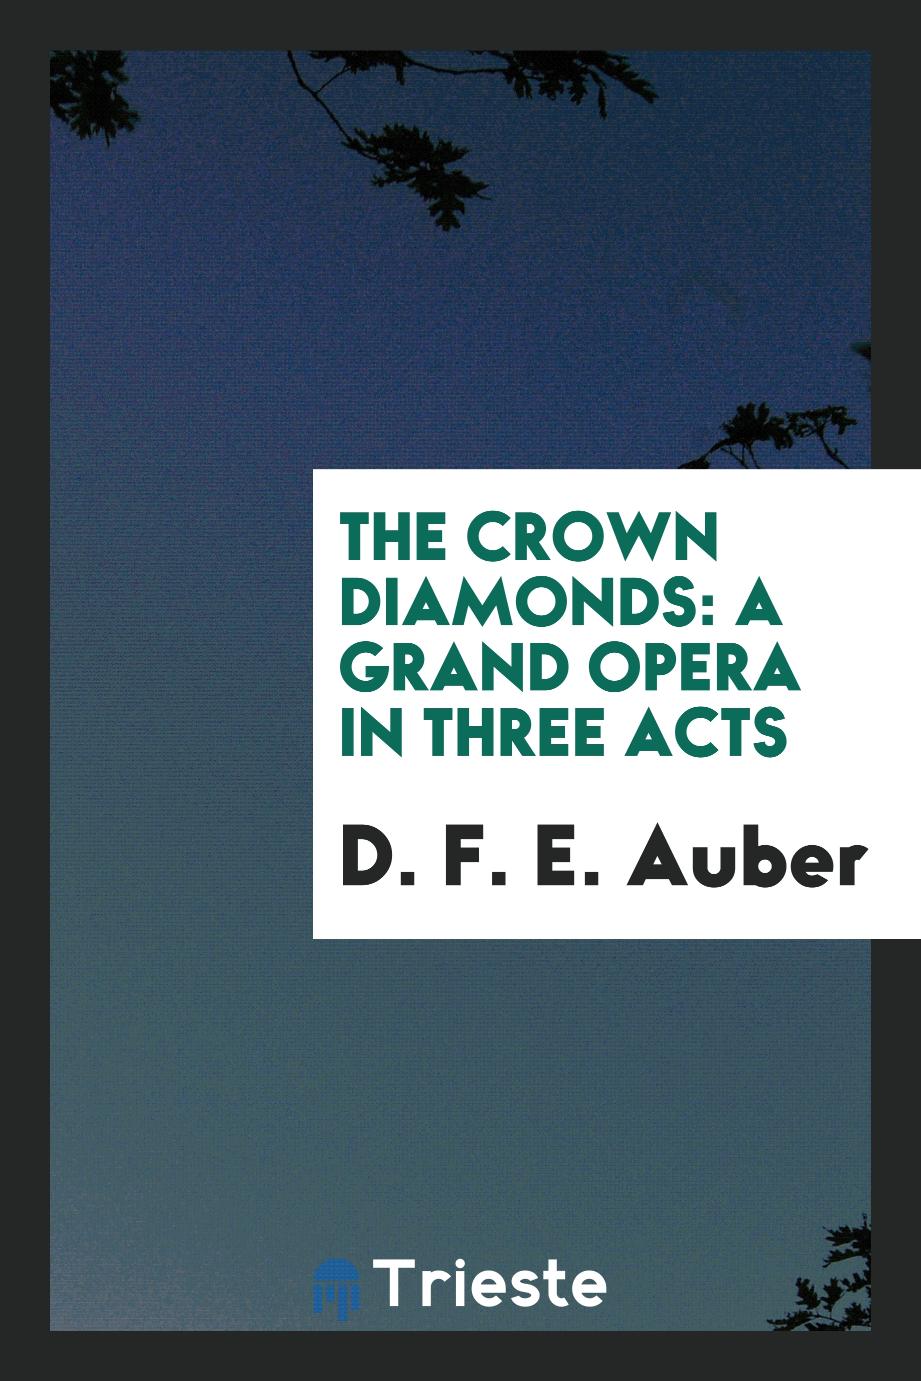 The Crown Diamonds: A Grand Opera in Three Acts